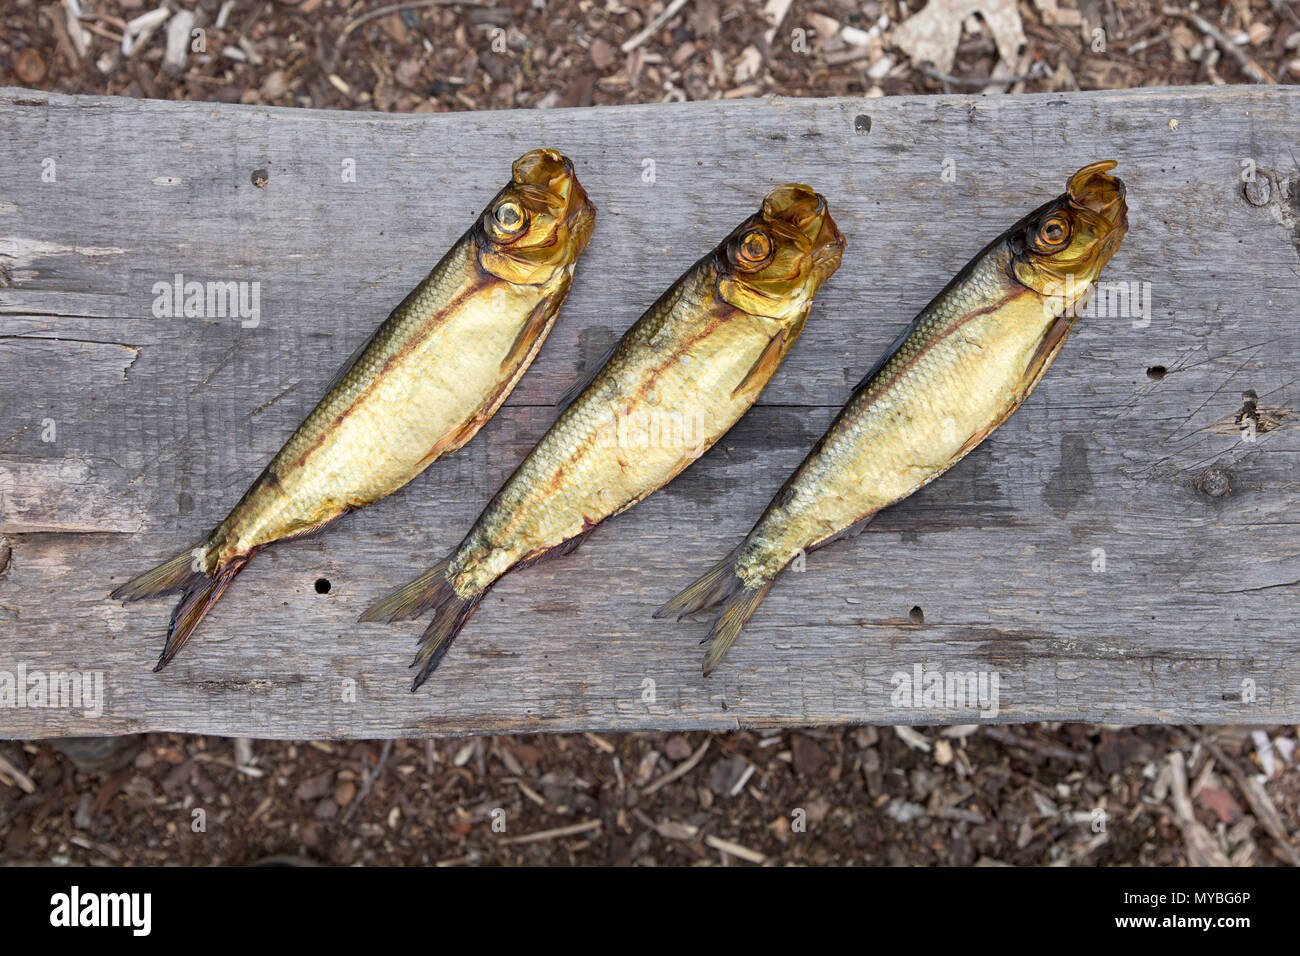 Three dried alewives from a smokehouse in Maine, USA. Stock Photo